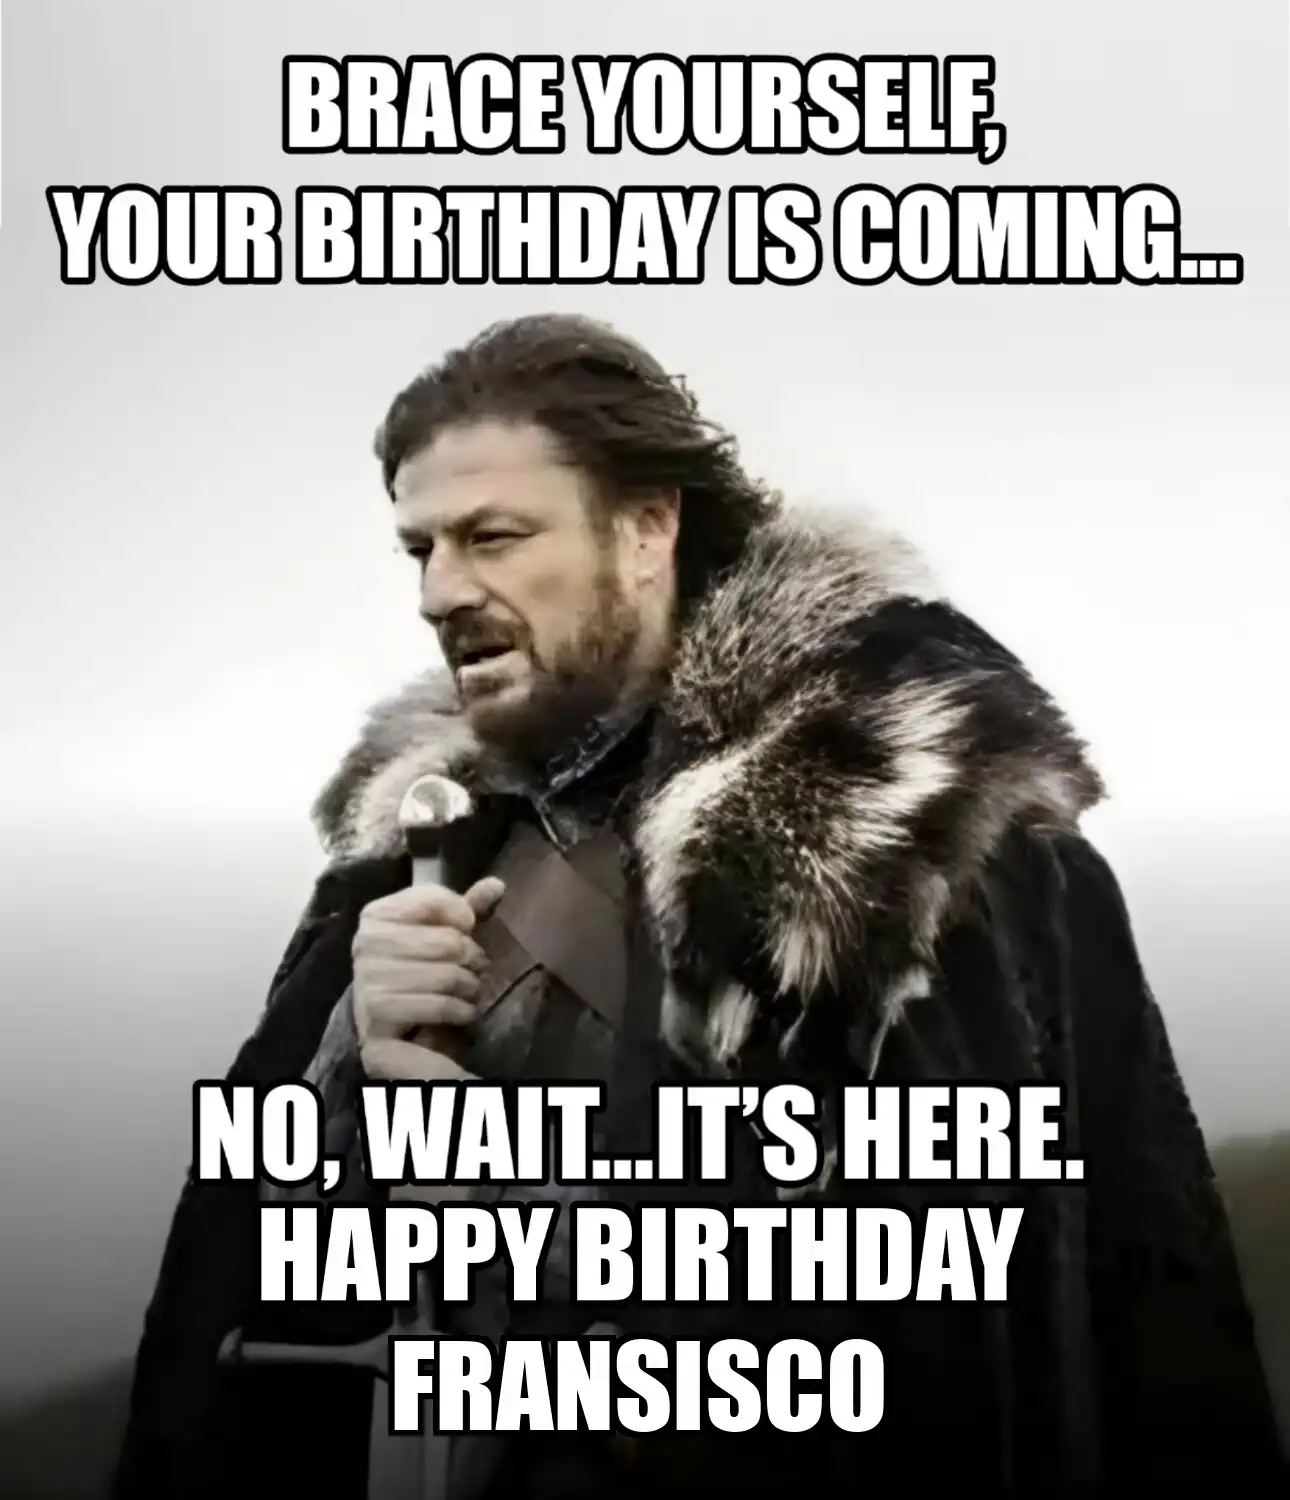 Happy Birthday Fransisco Brace Yourself Your Birthday Is Coming Meme